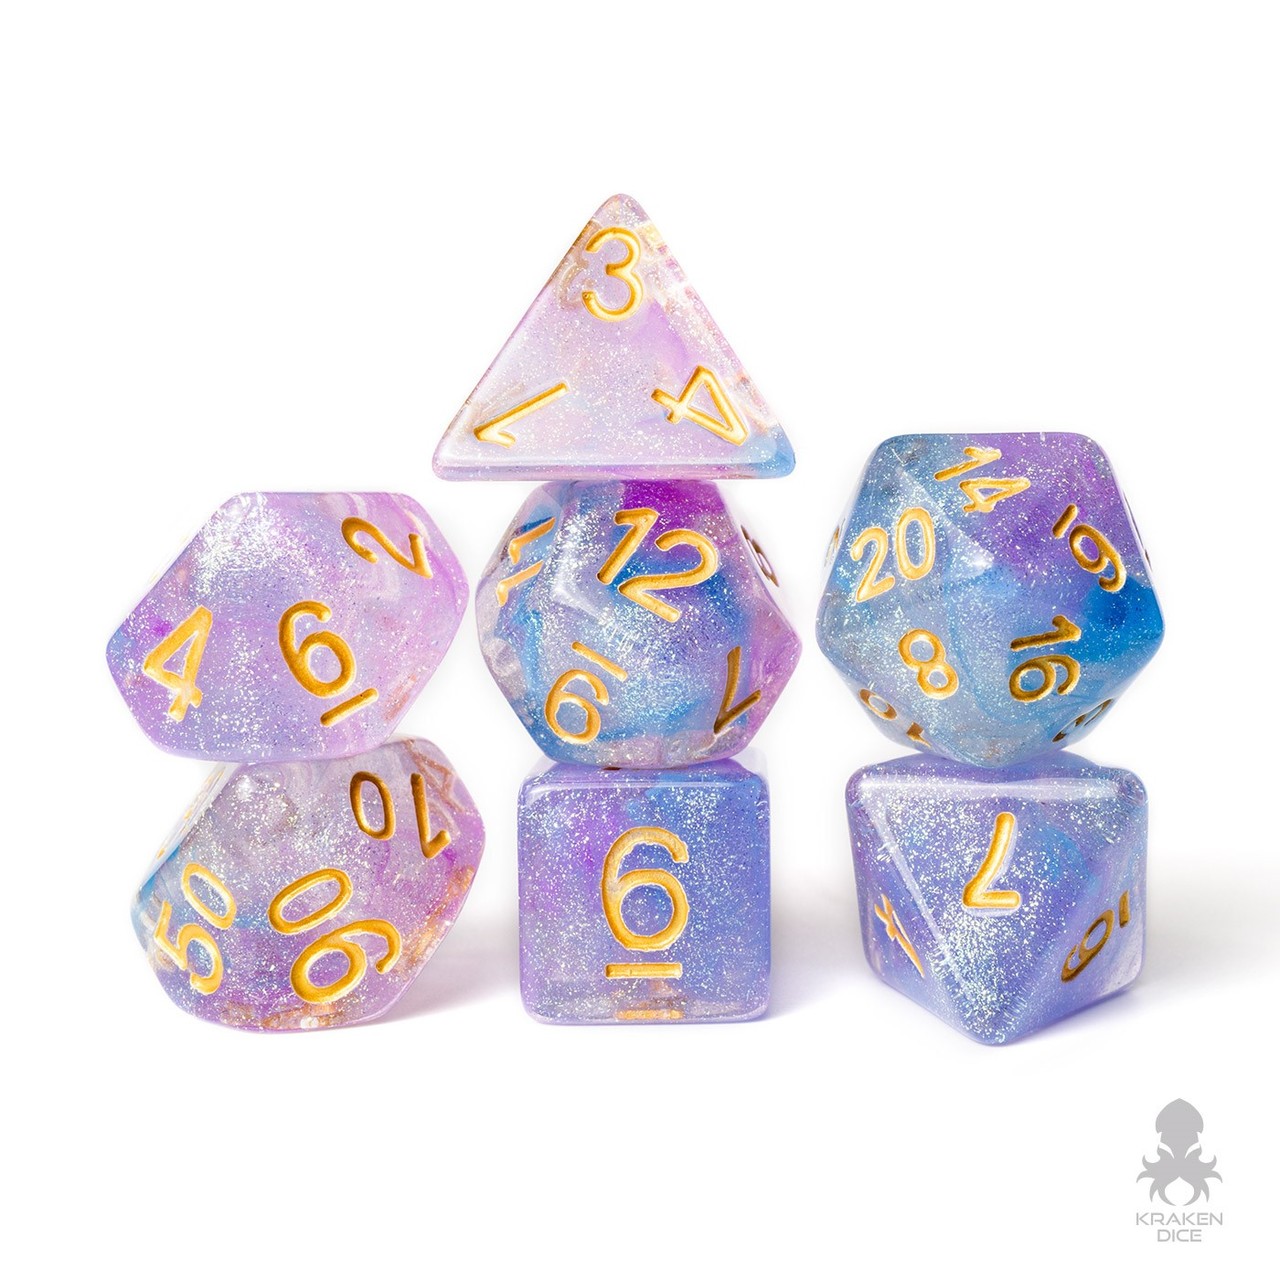 DND dice that are light blue, pink, and lavender